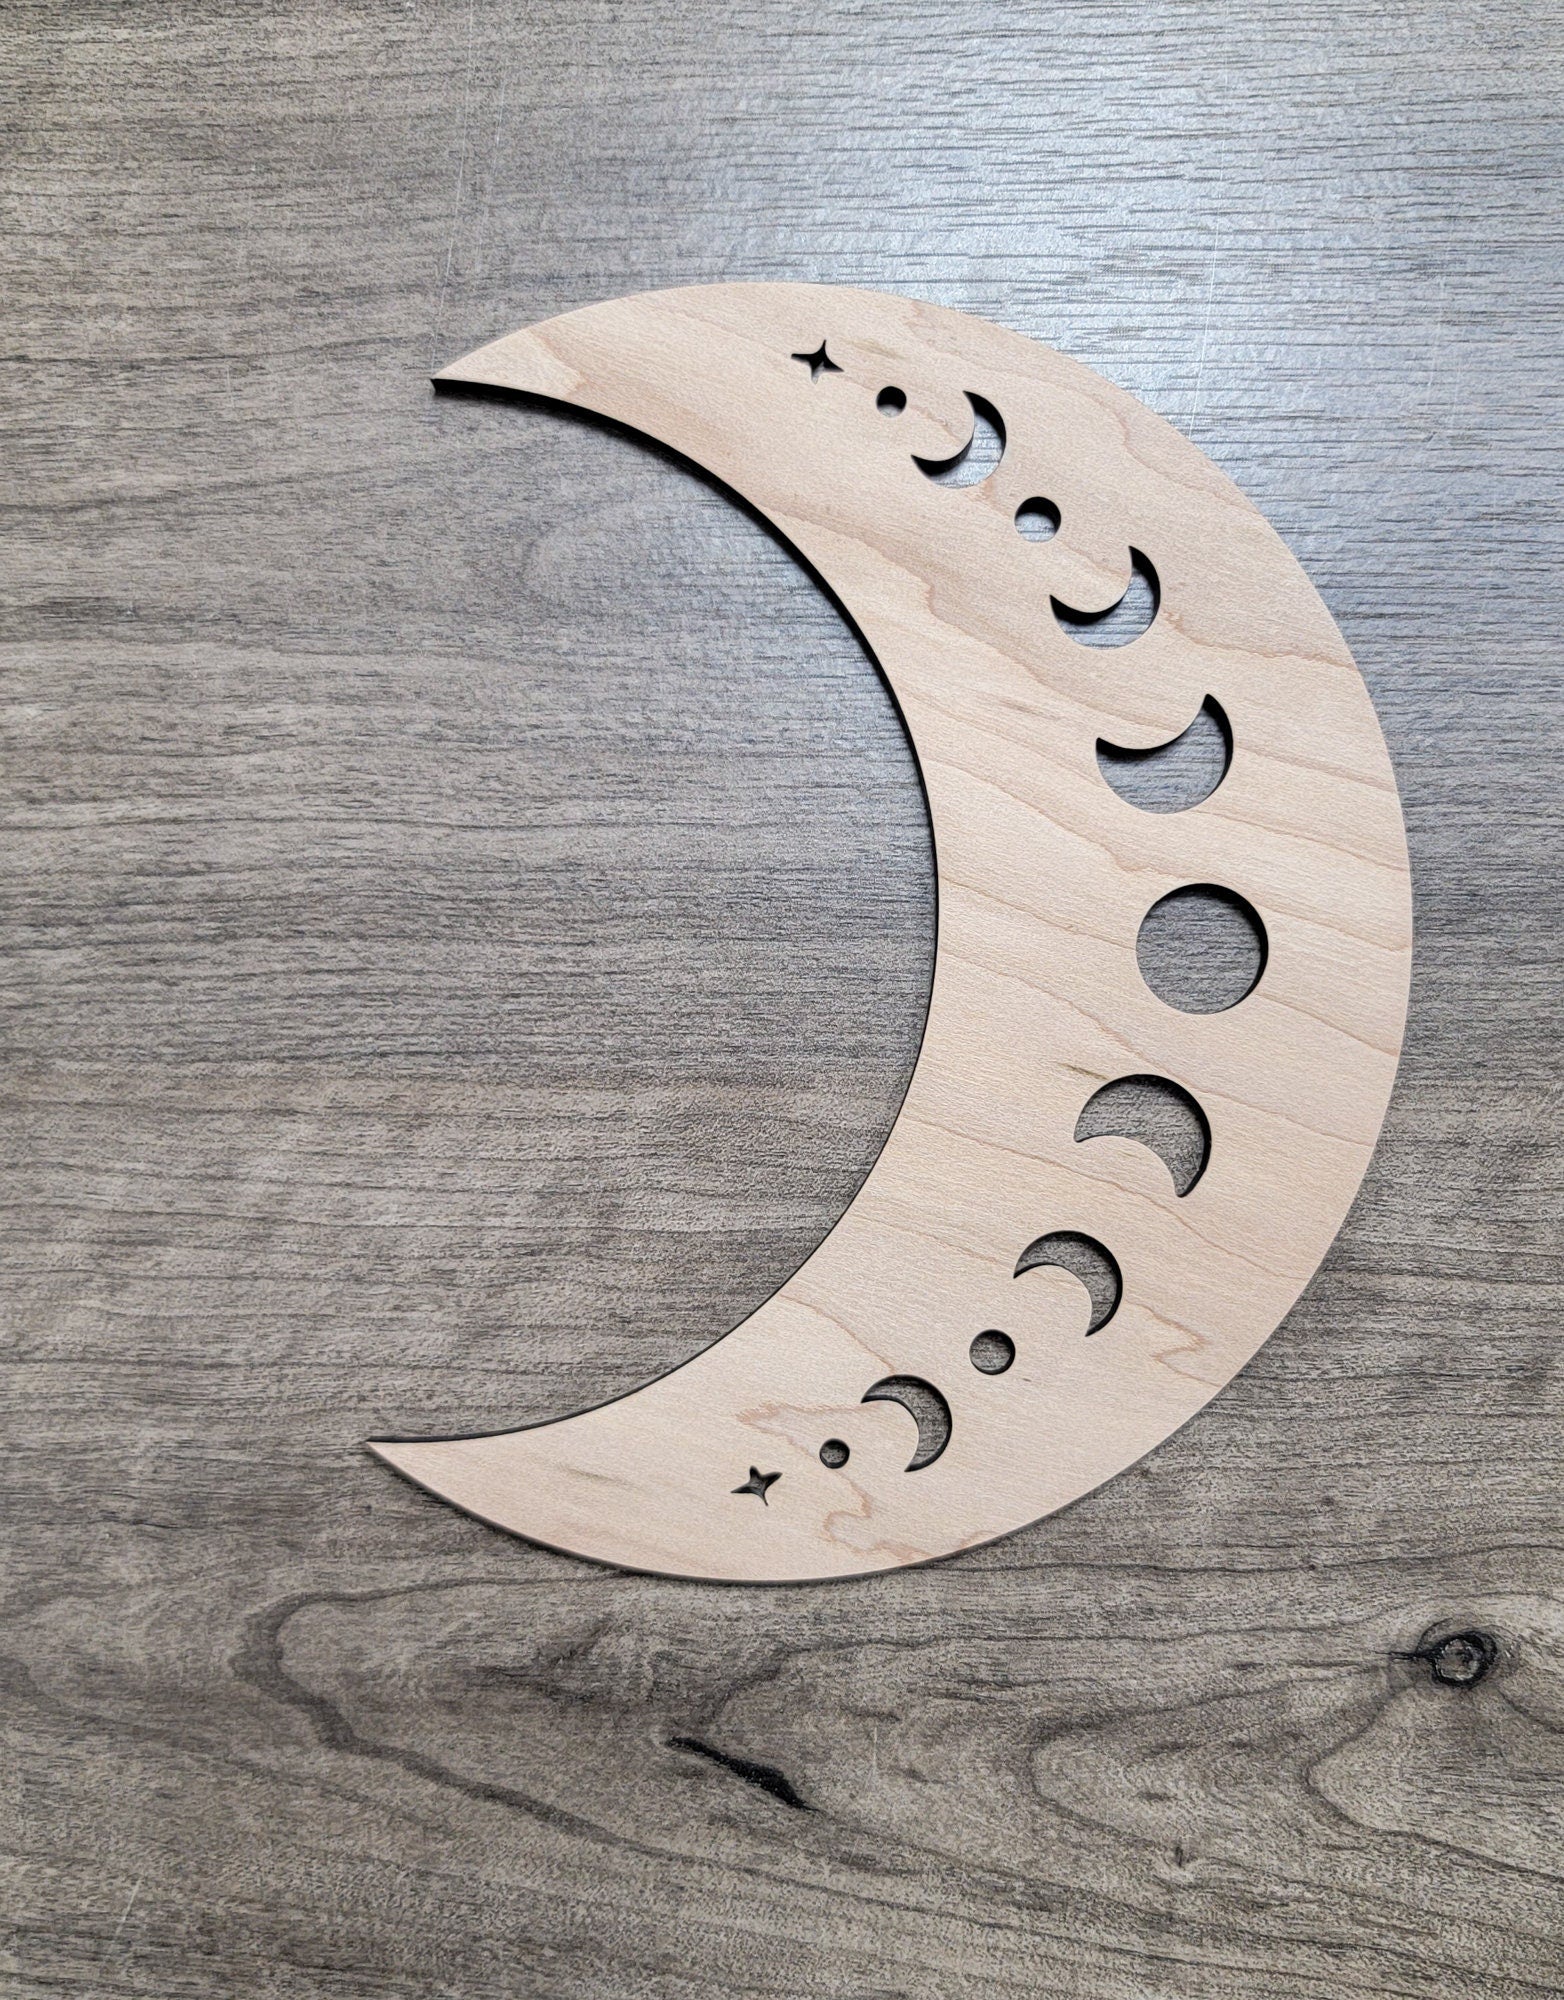 Crescent Moon Phase Wood Shape Sign, Wooden Moon Shape Blank, Unfinished Cut out, Crafts DIY for Sign Making, Boho Decor theme Natural 002